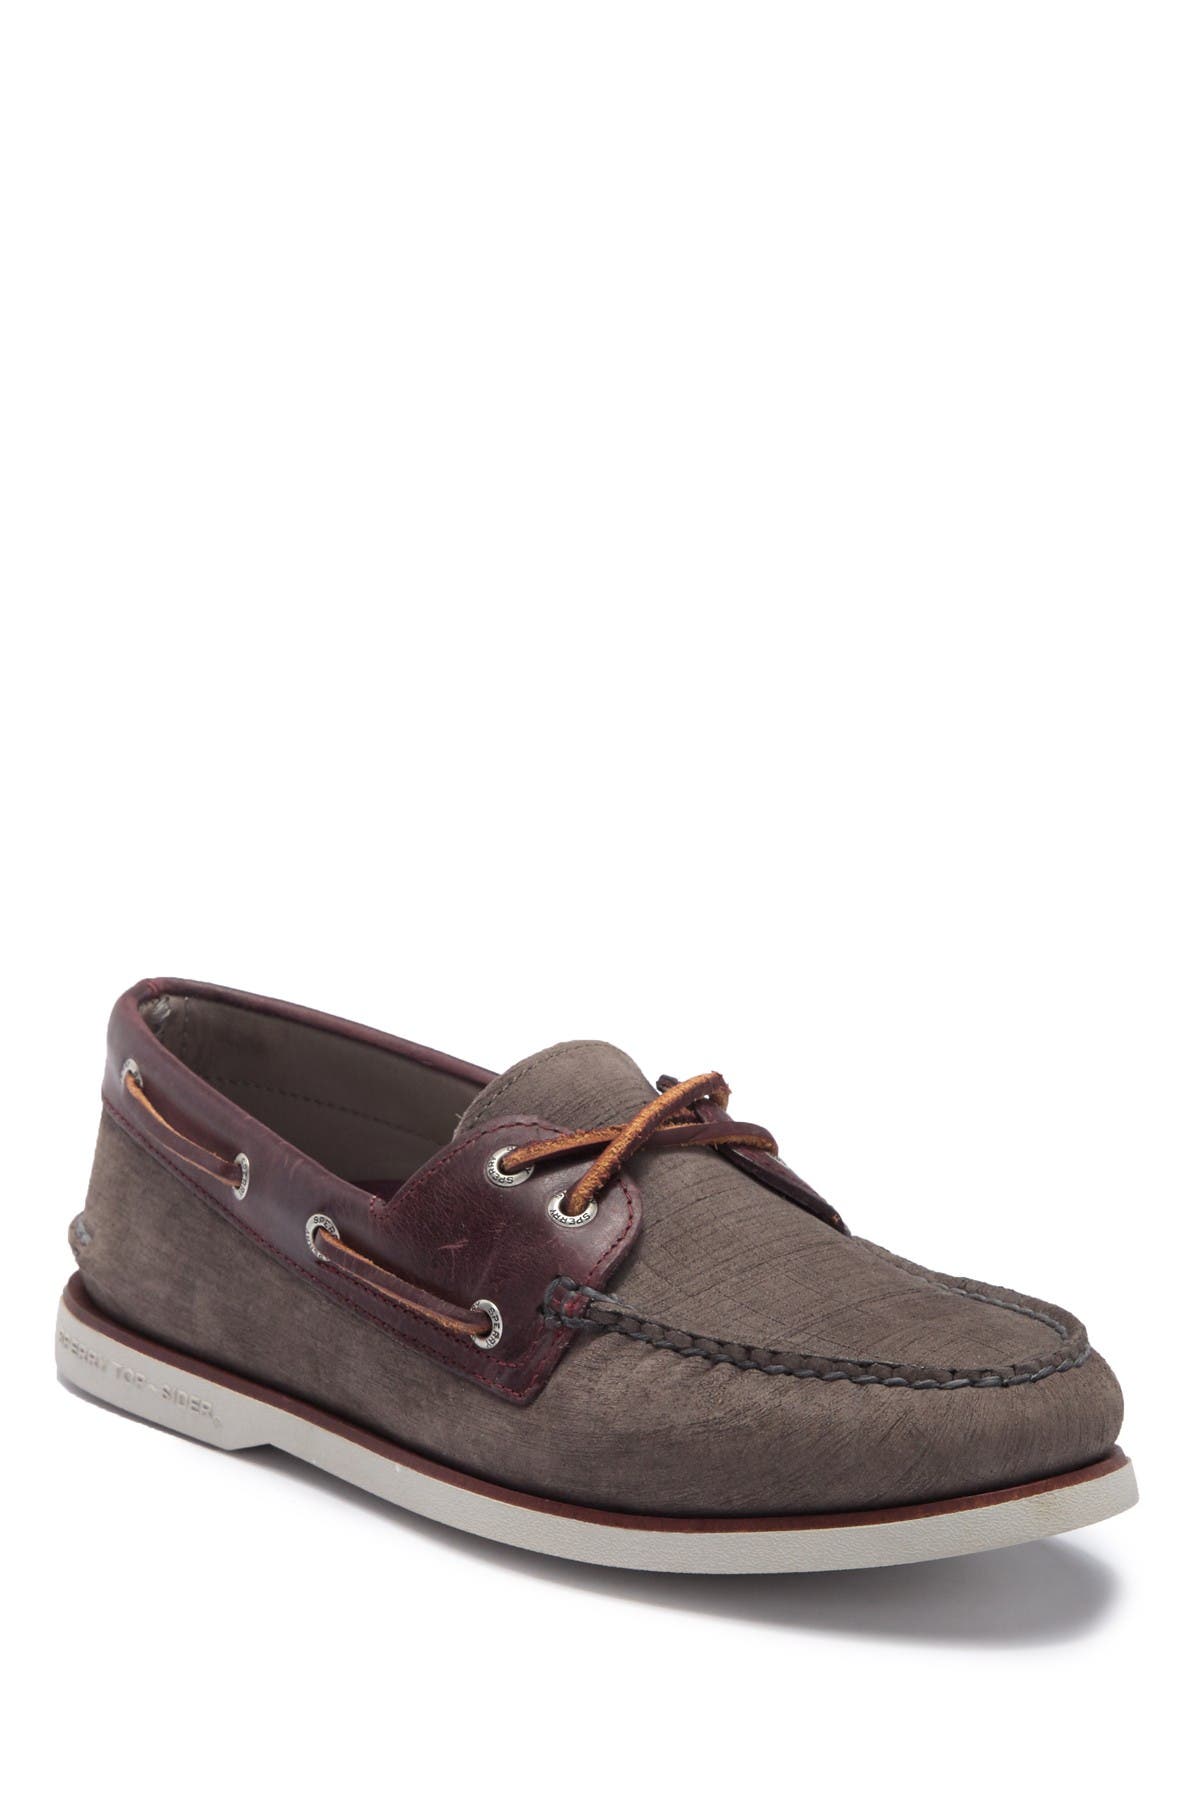 Sperry | Gold Cup Nubuck Boat Shoe 